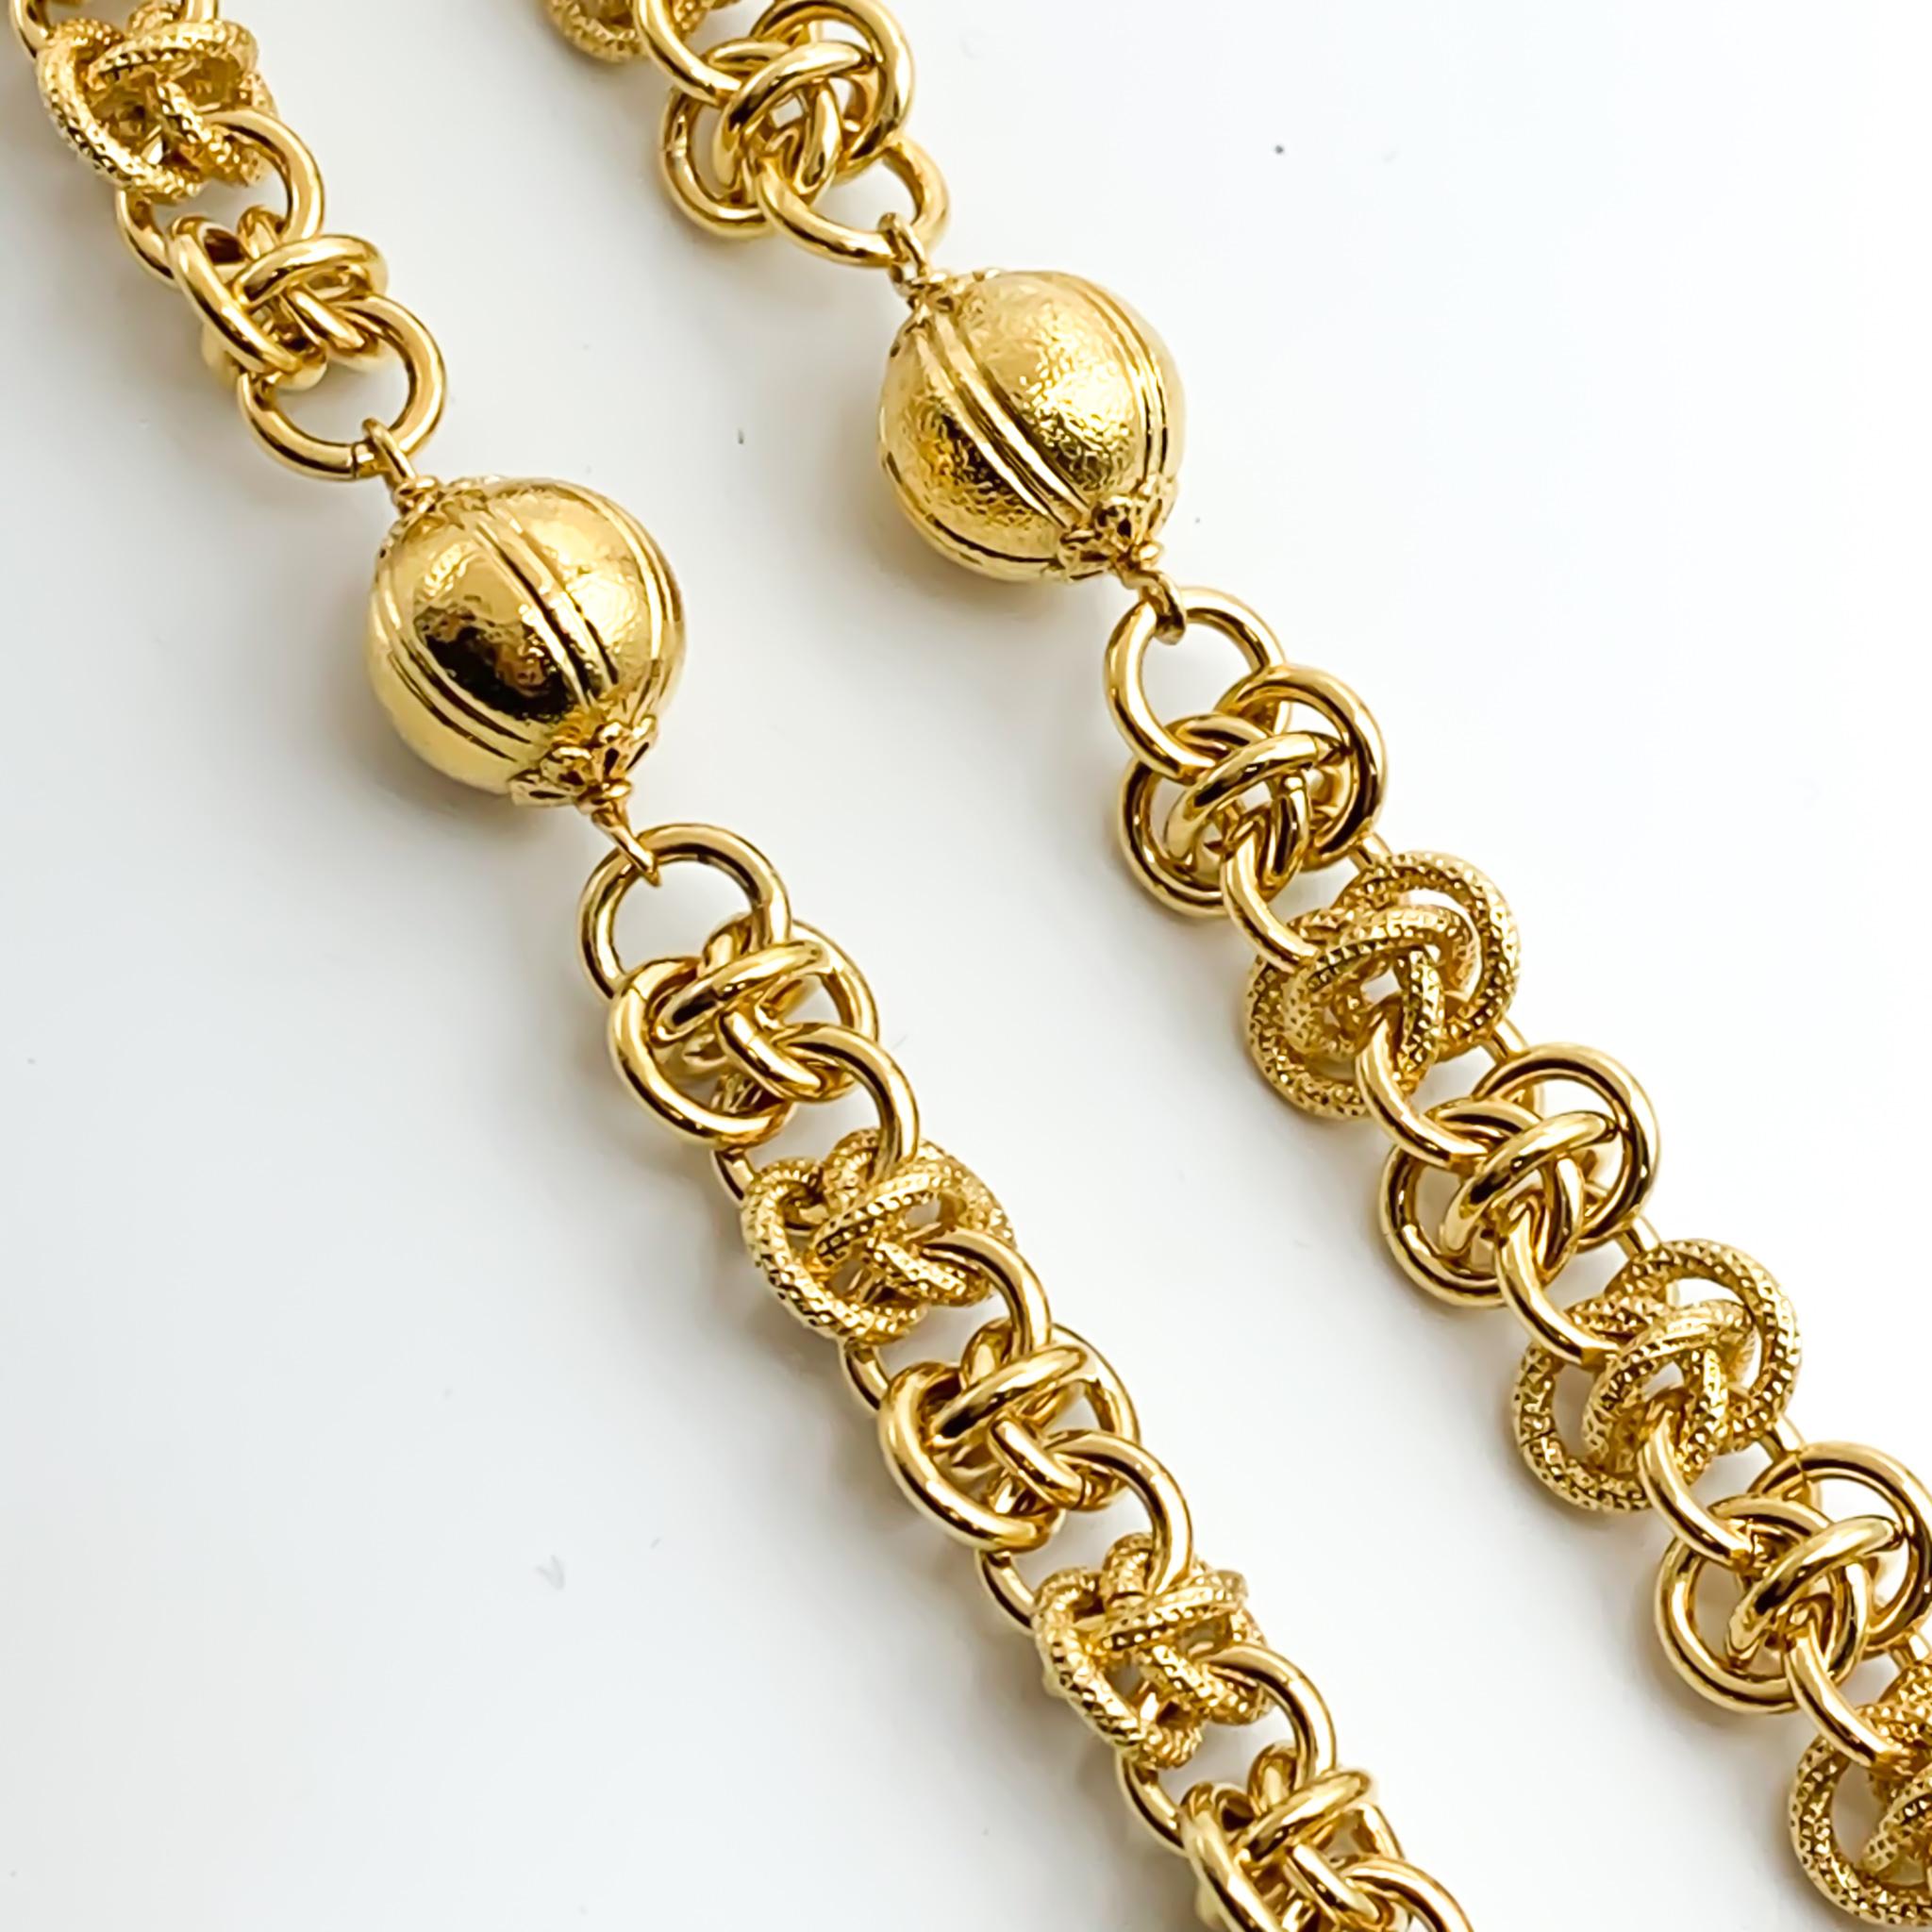 Cristina Sabatini 18k gold platted chain necklace with matching beads. 